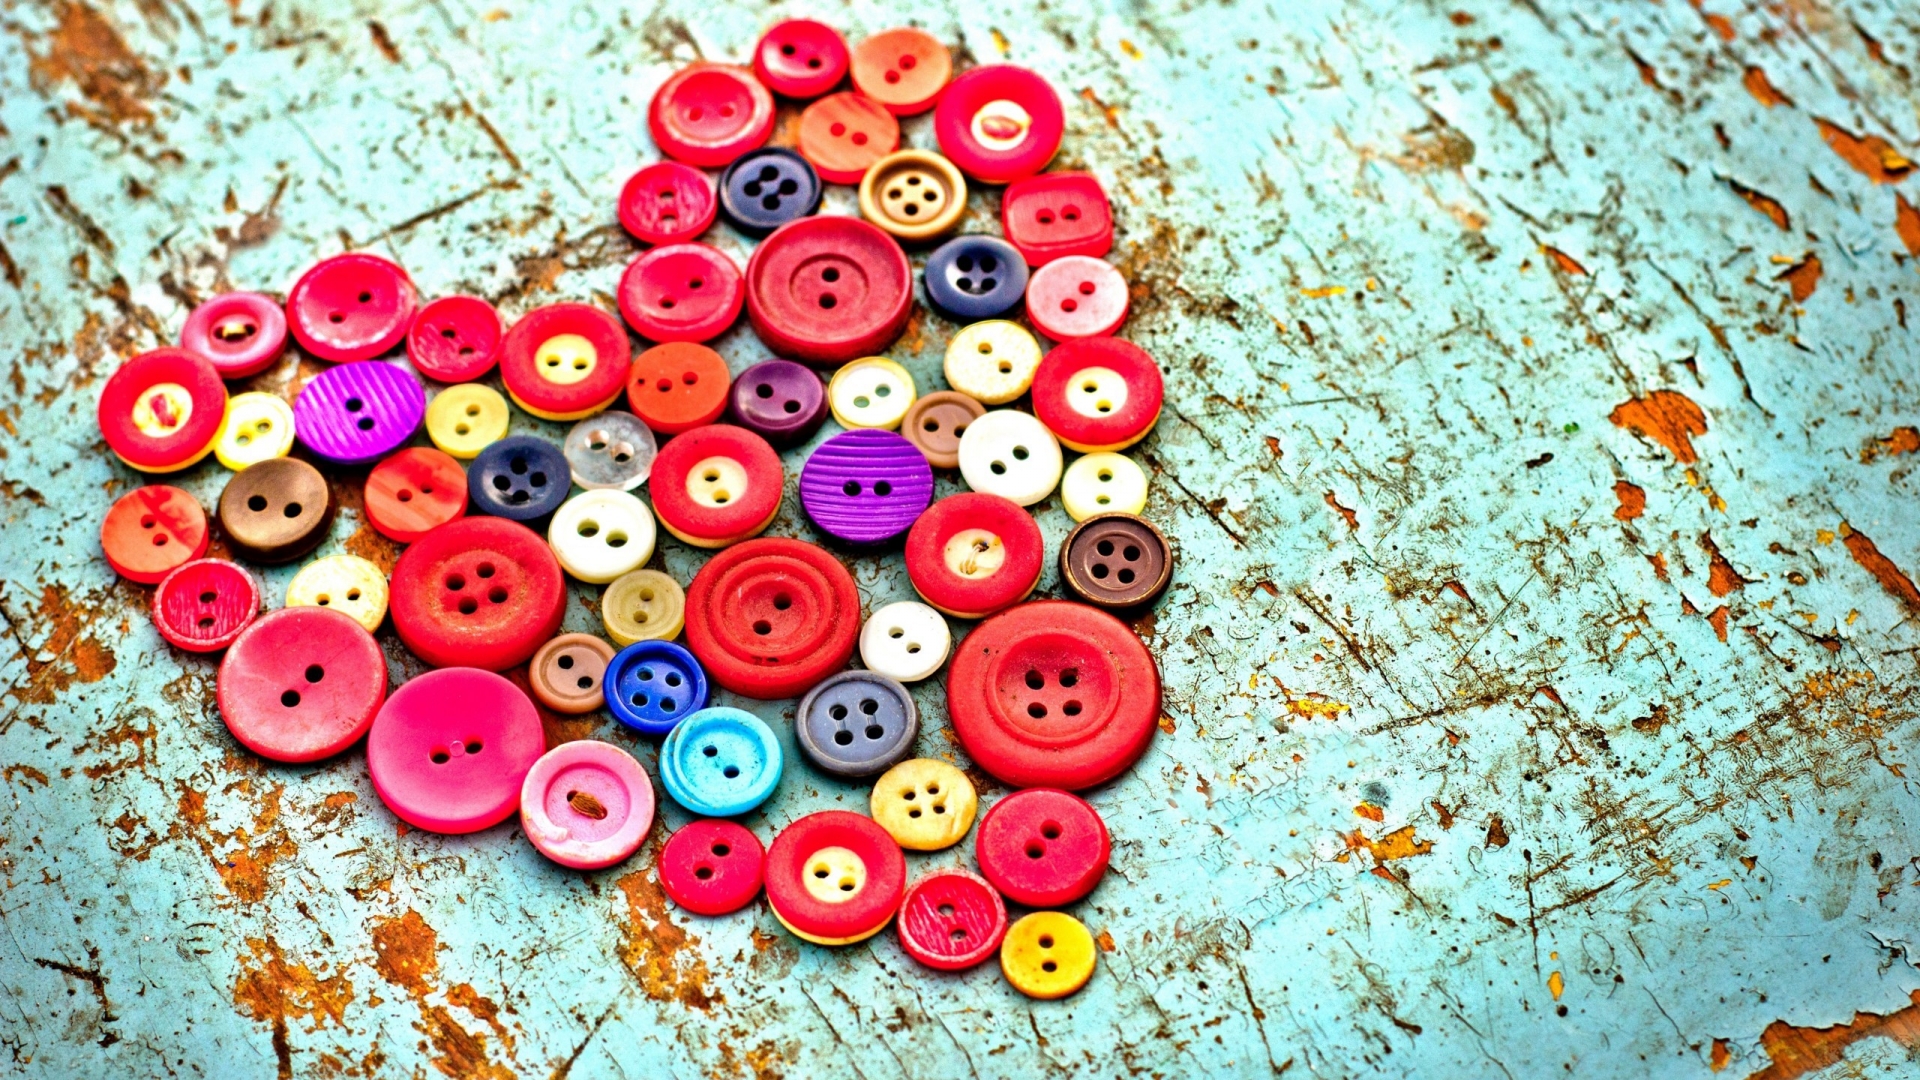 Buttons Heart for 1920 x 1080 HDTV 1080p resolution